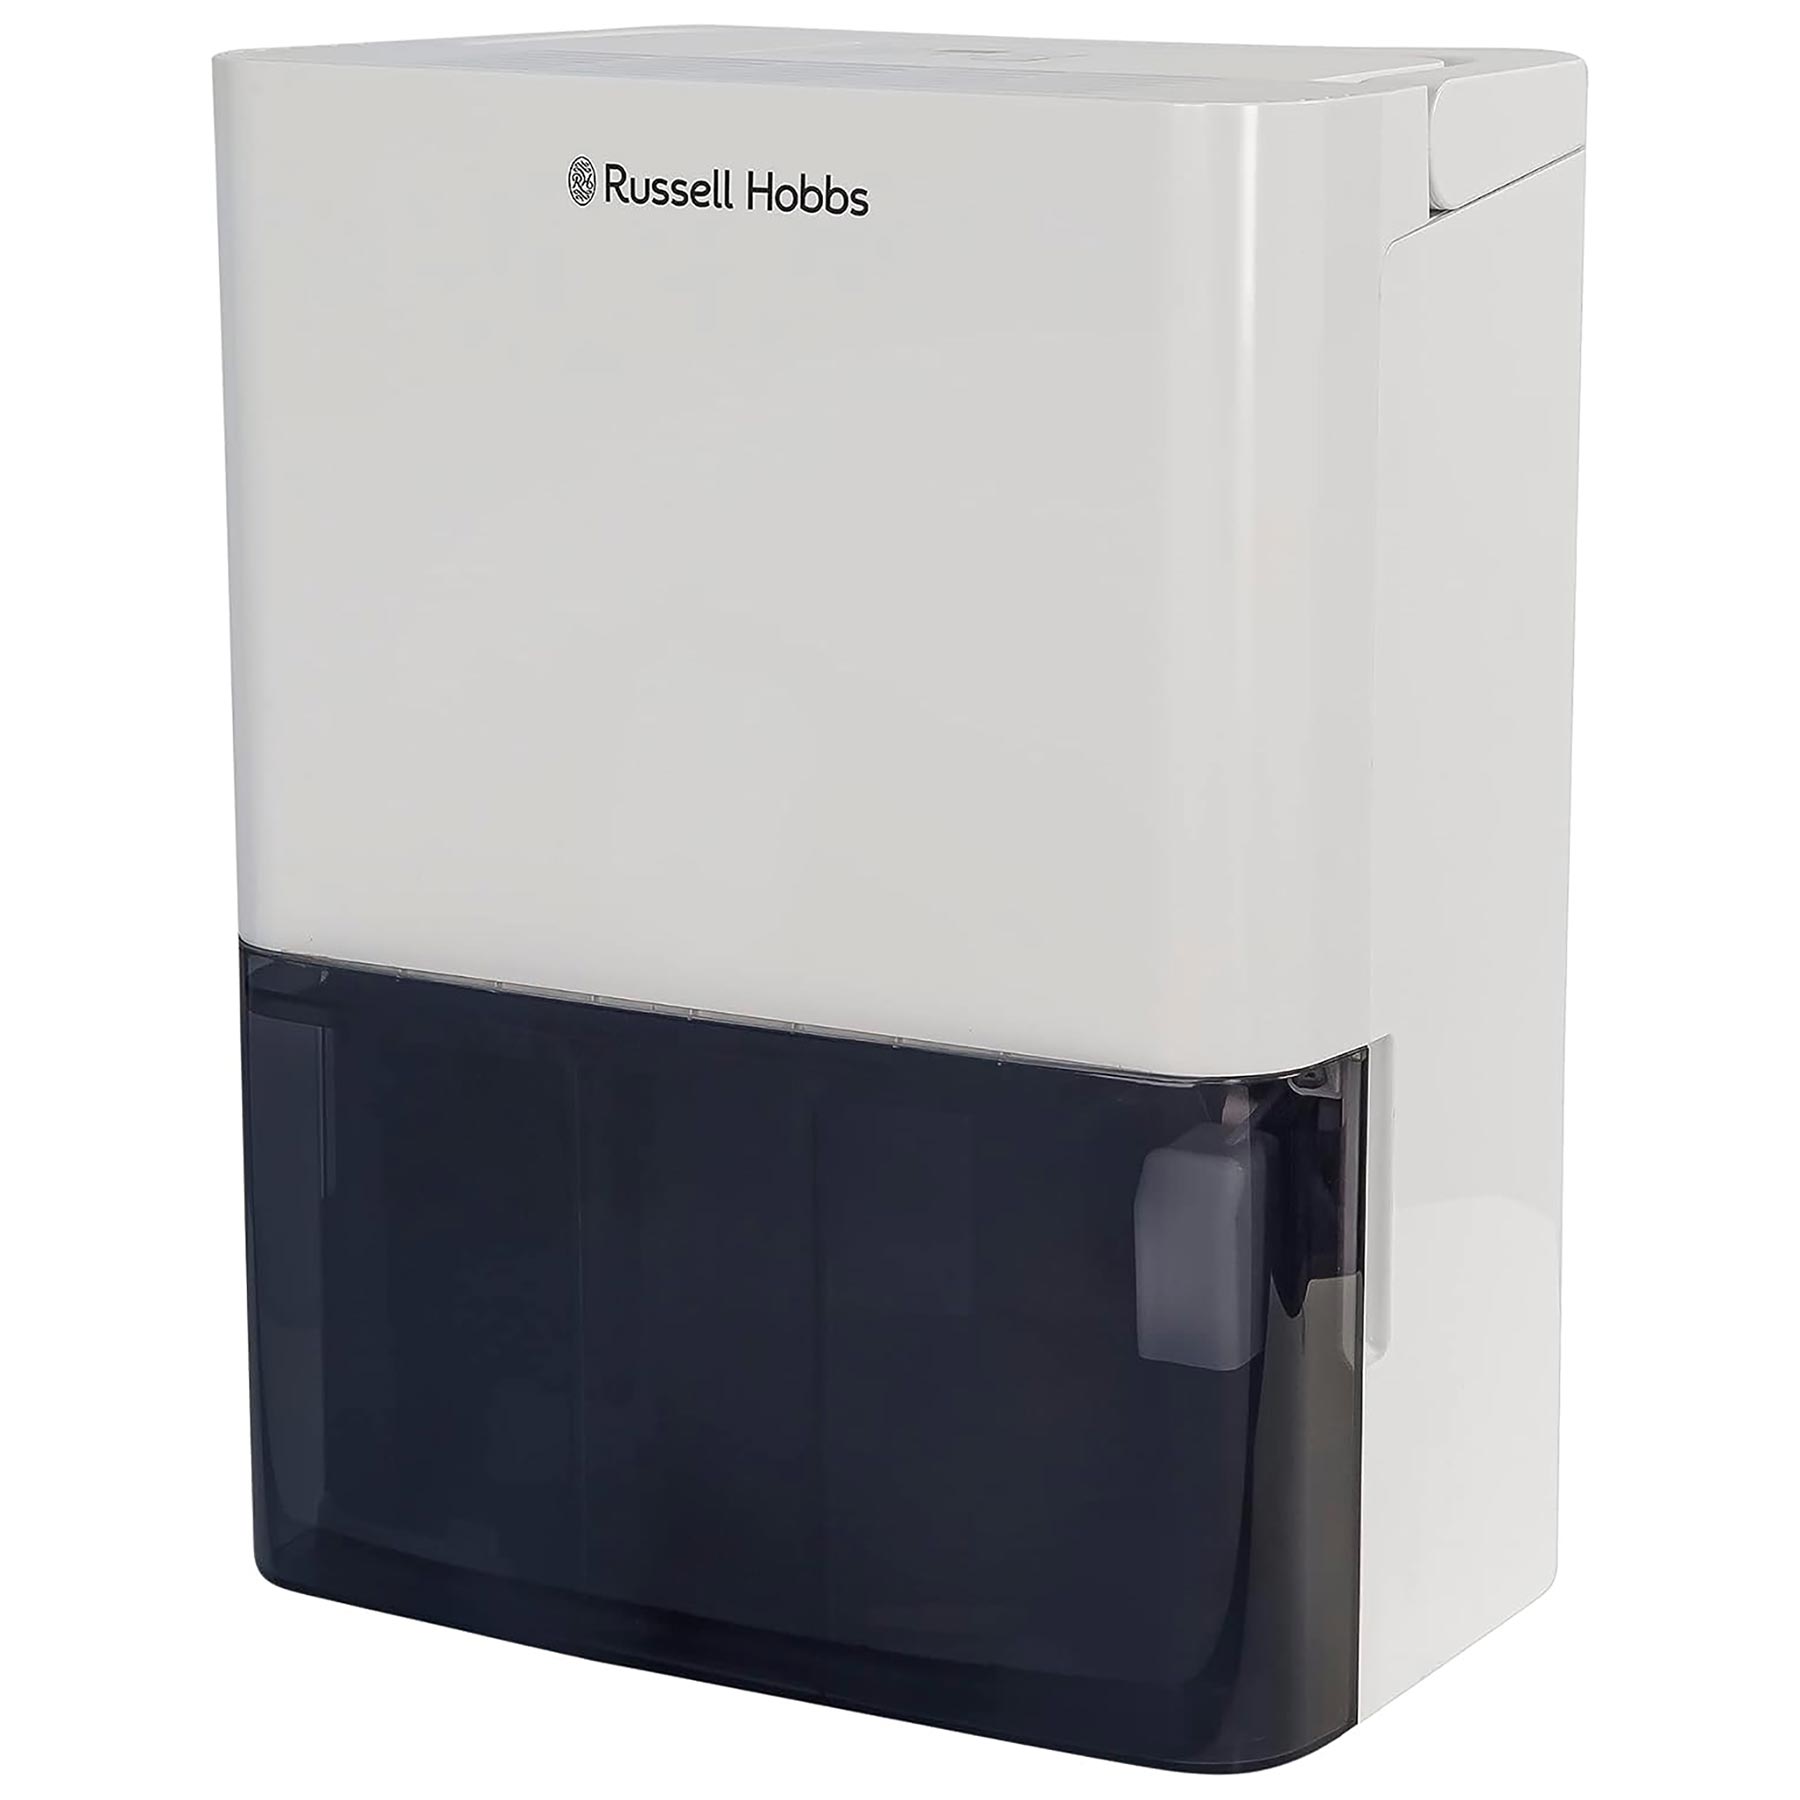 Image of Russell Hobbs RHDH1001 10L Dehumidifier in White and Black